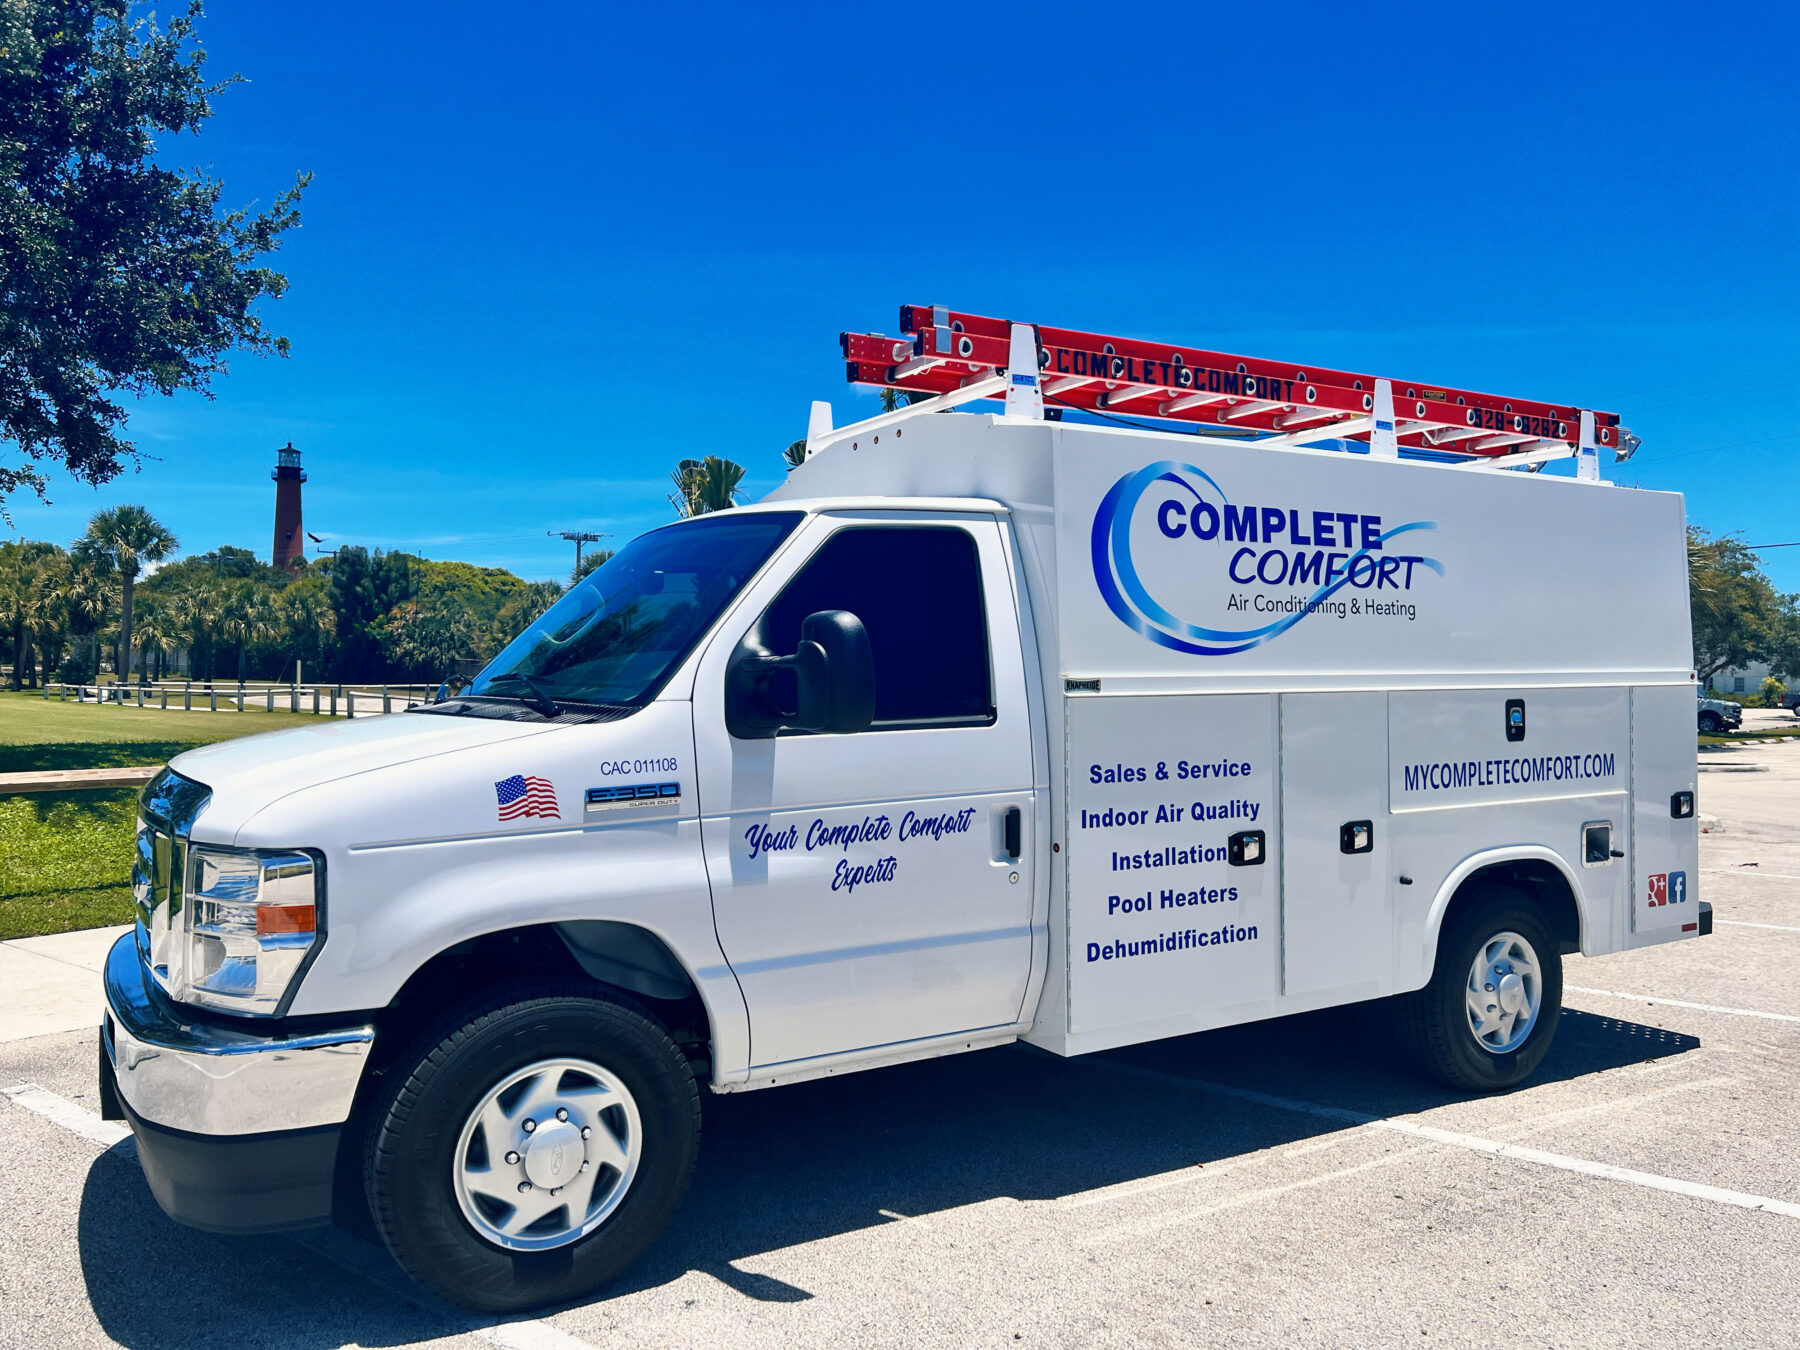 Specials and Savings  Complete Comfort Air Conditioning & Heating